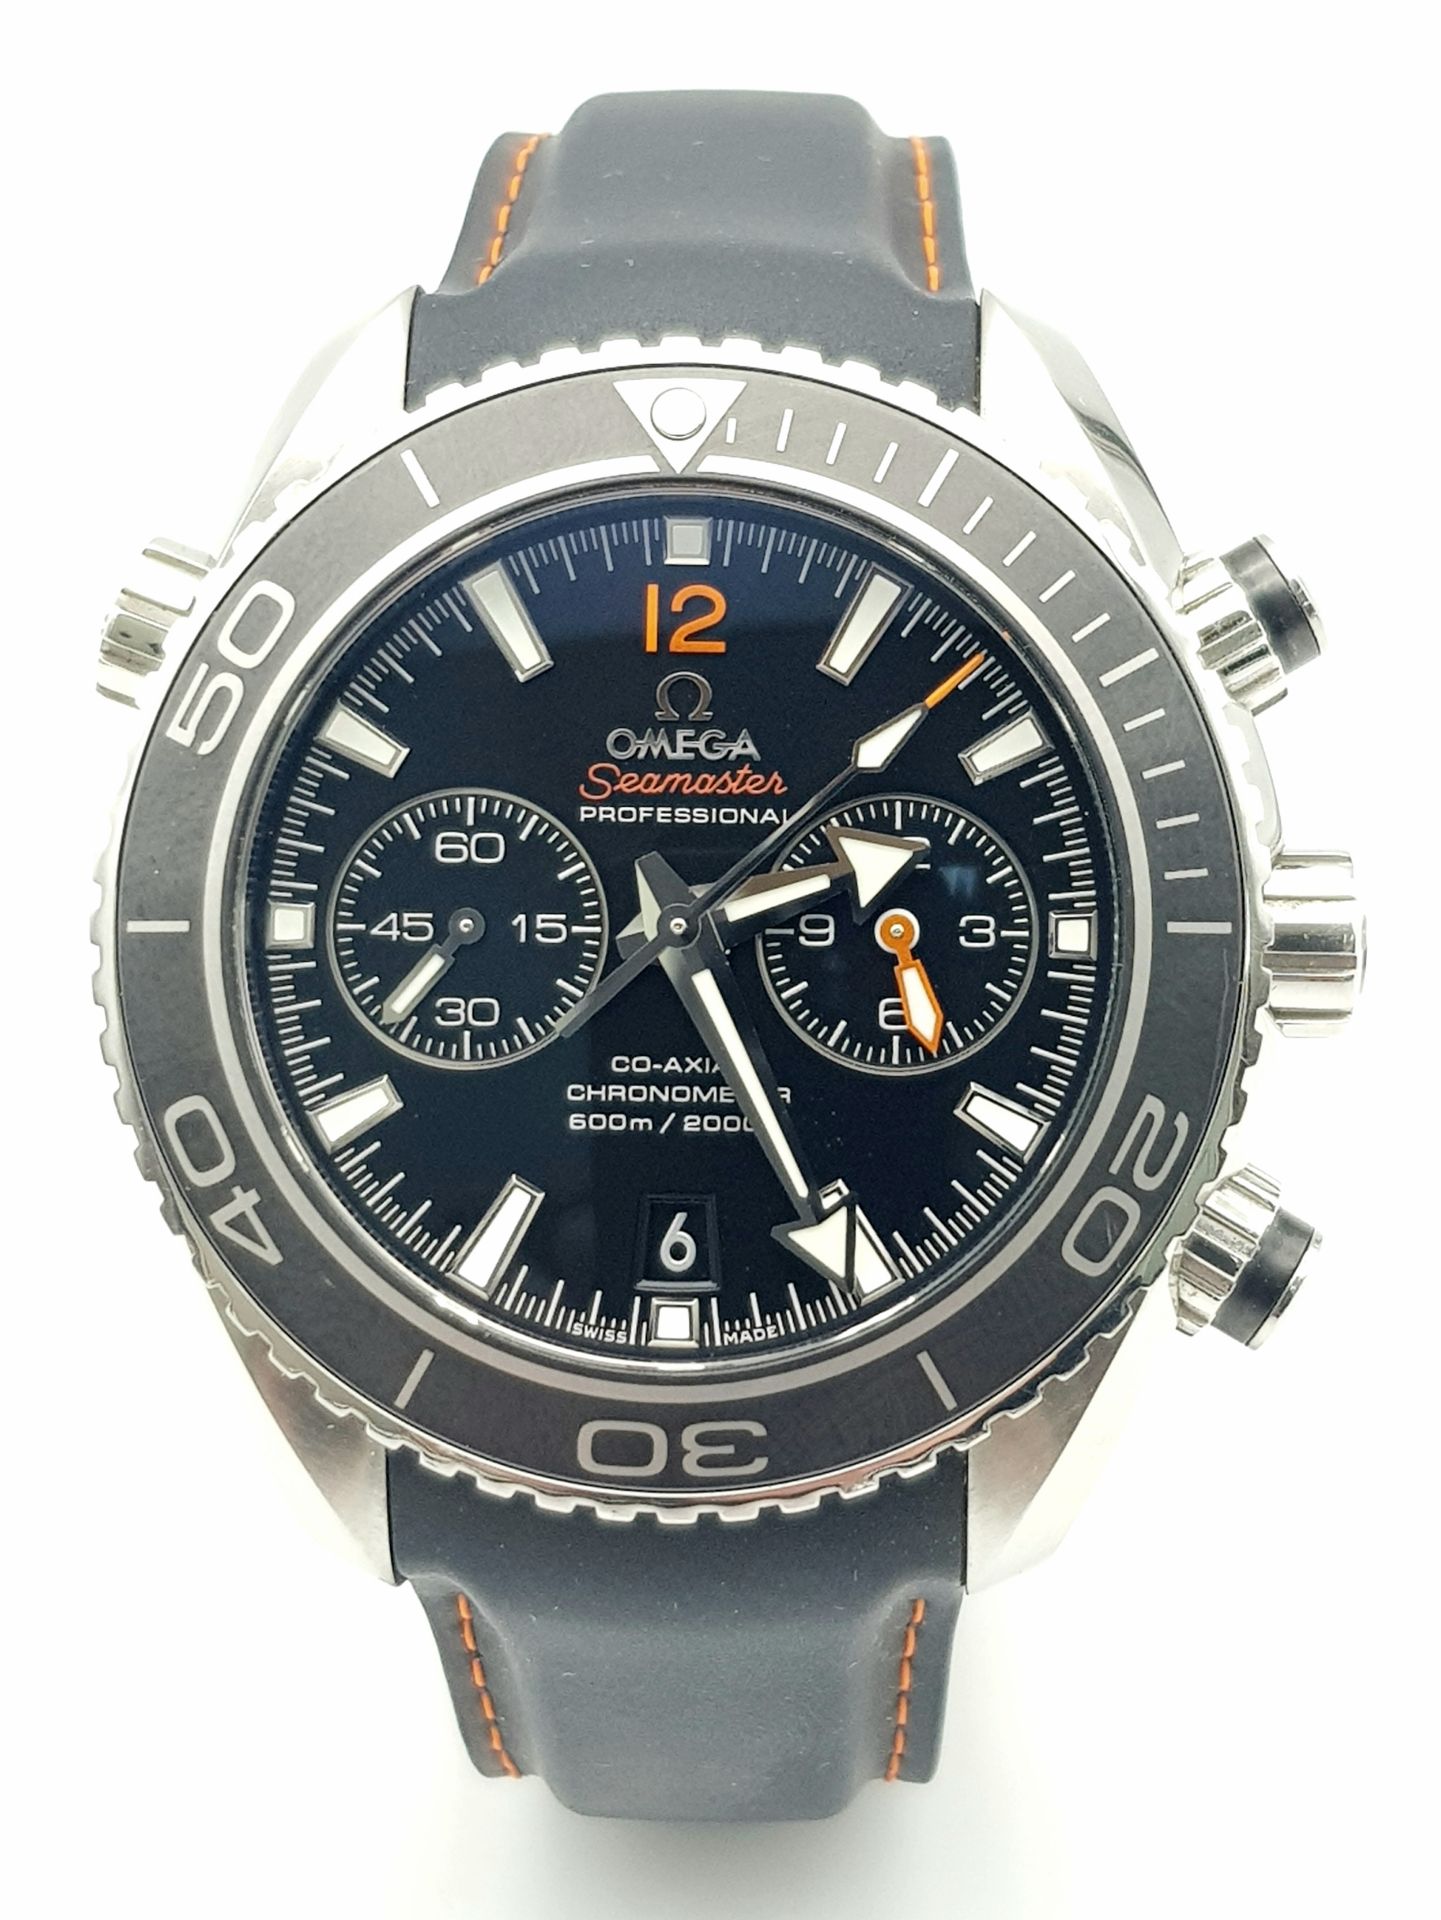 A FANTASTIC EXAMPLE OF AN OMEGA "SEAMASTER" PROFESSIONAL CO-AXIAL CHRONOMETER WITH 2000FT LIMIT . - Image 2 of 8